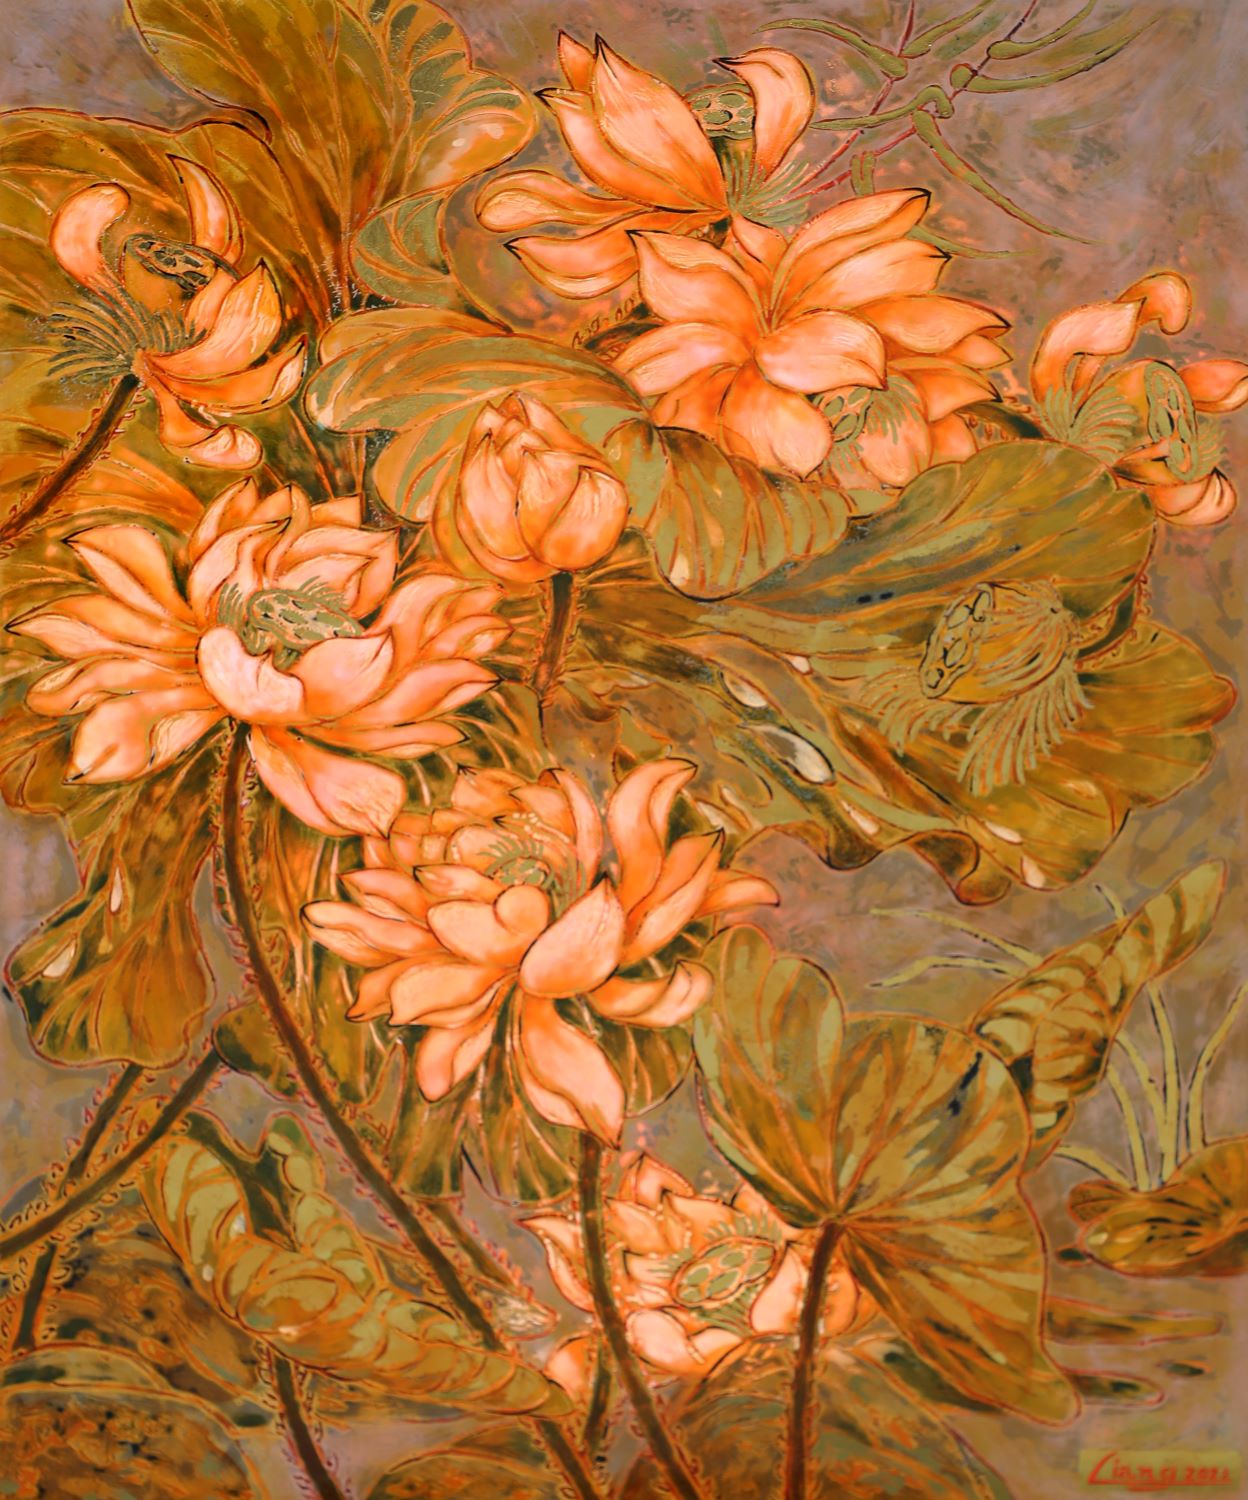 Early Lotus VII - Vietnamese Lacquer Painting by Artist Nguyen Hong Giang